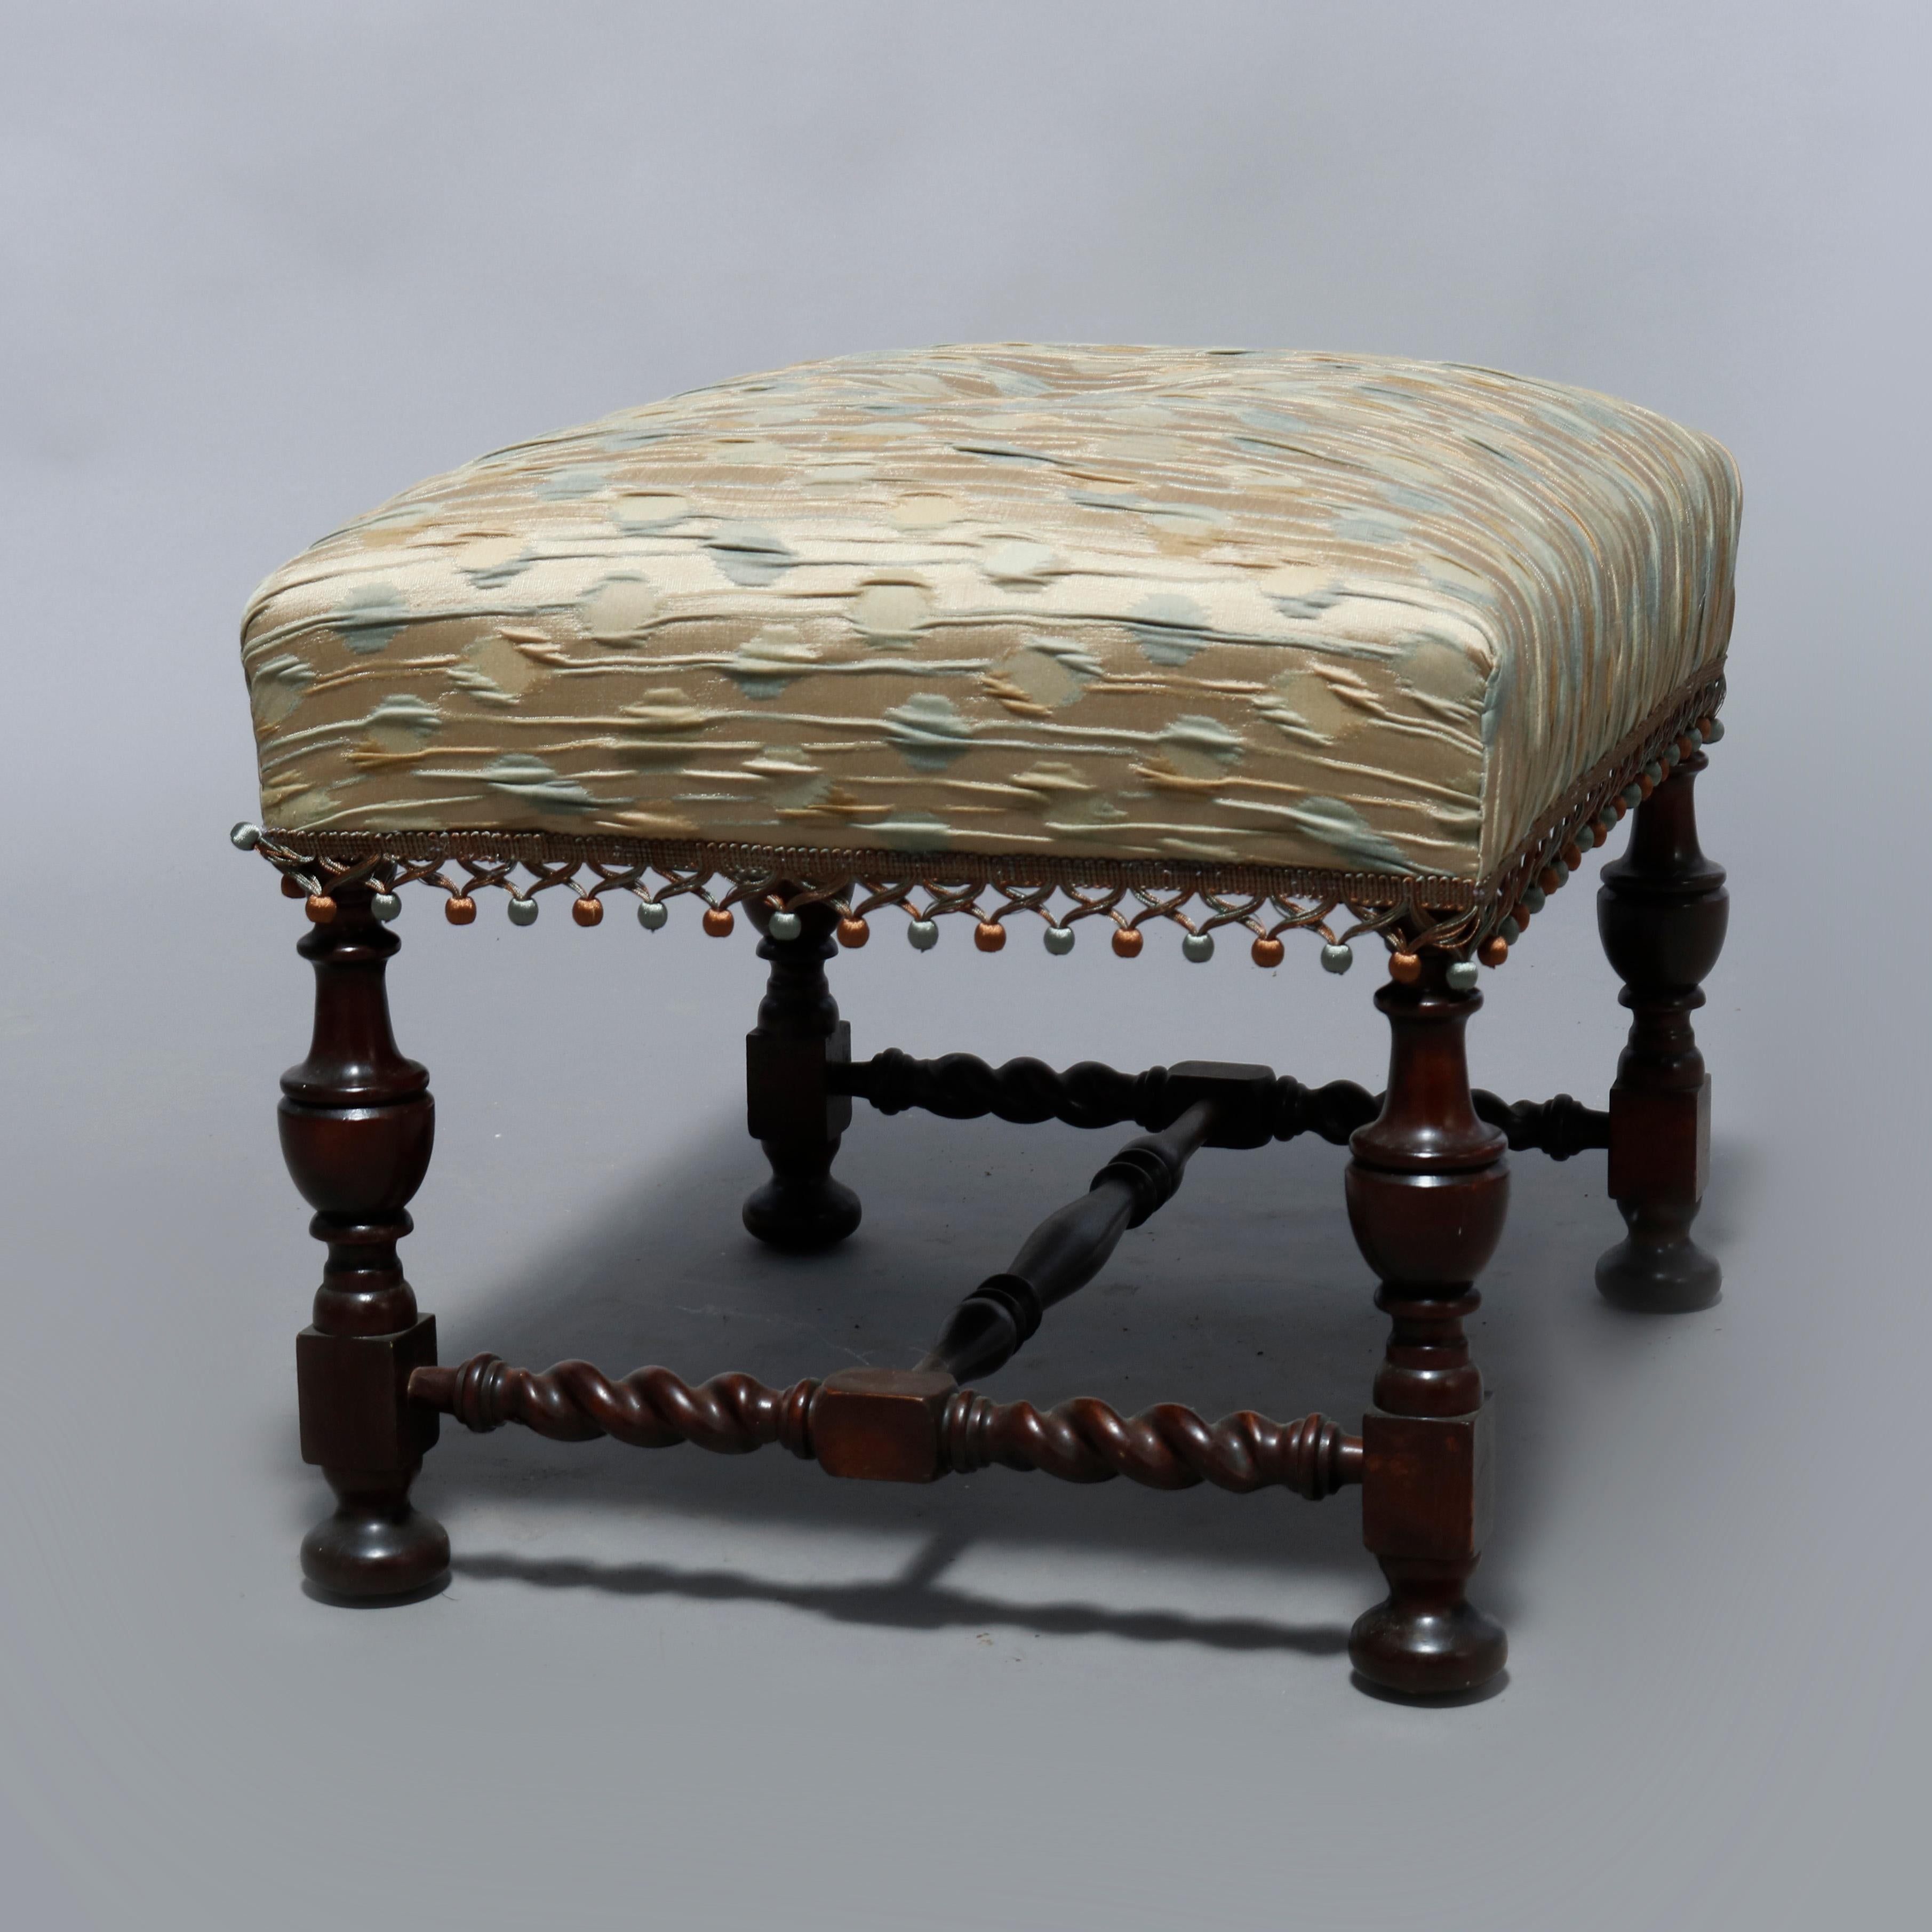 An antique English Elizabethan style bench offers single button upholstered seat on carved mahogany frame having turned legs and barley twist stretcher, 20th century

Measures: 18.5